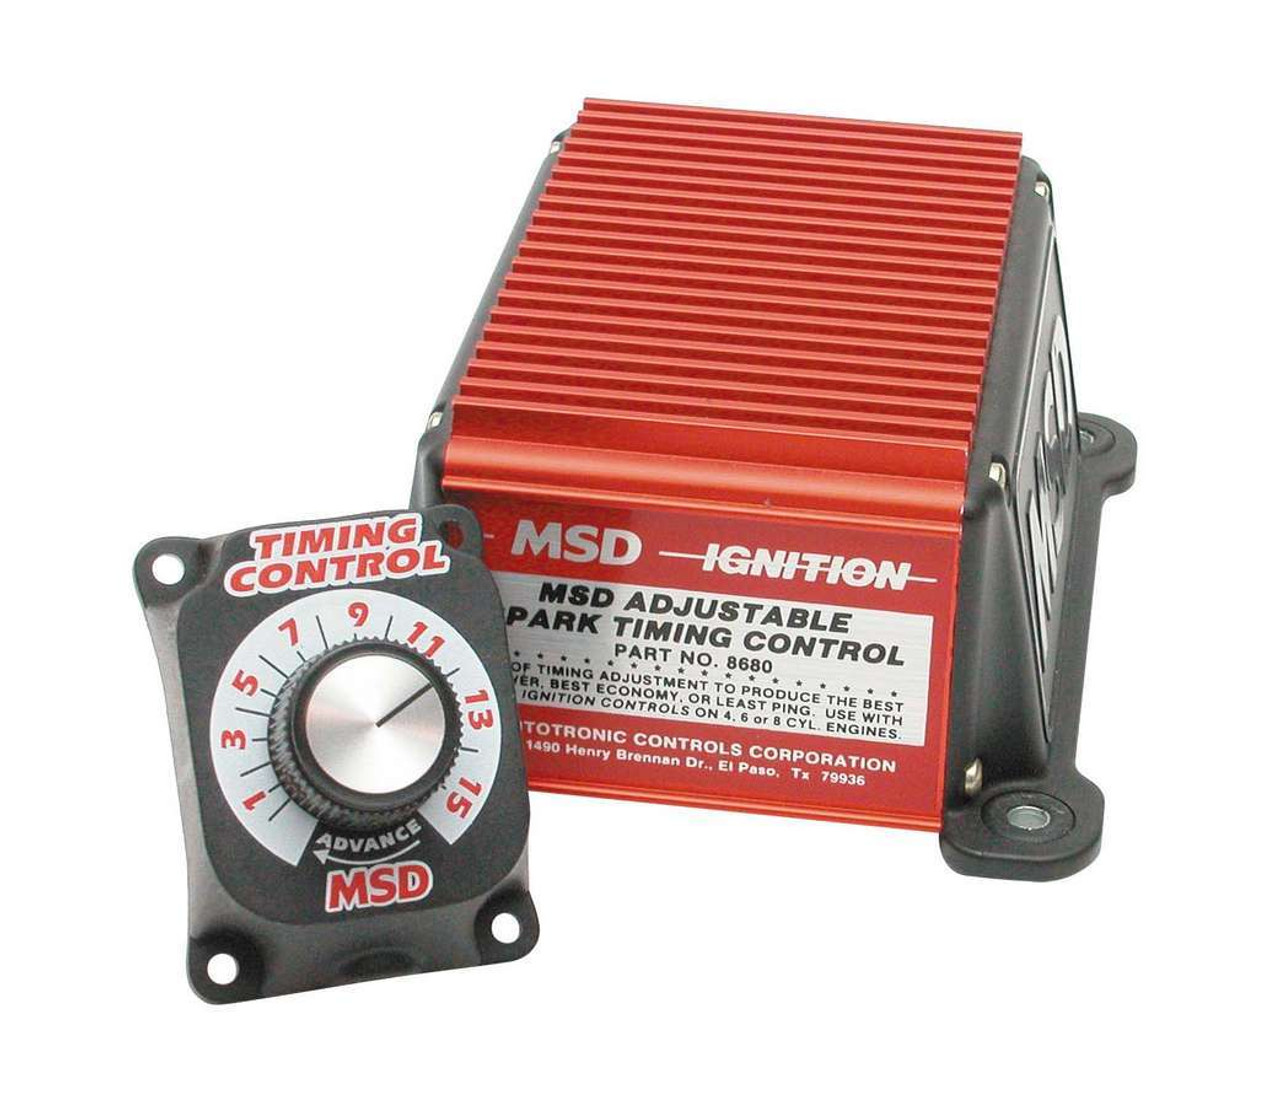 MSD Ignition Adjustable Timing Contro